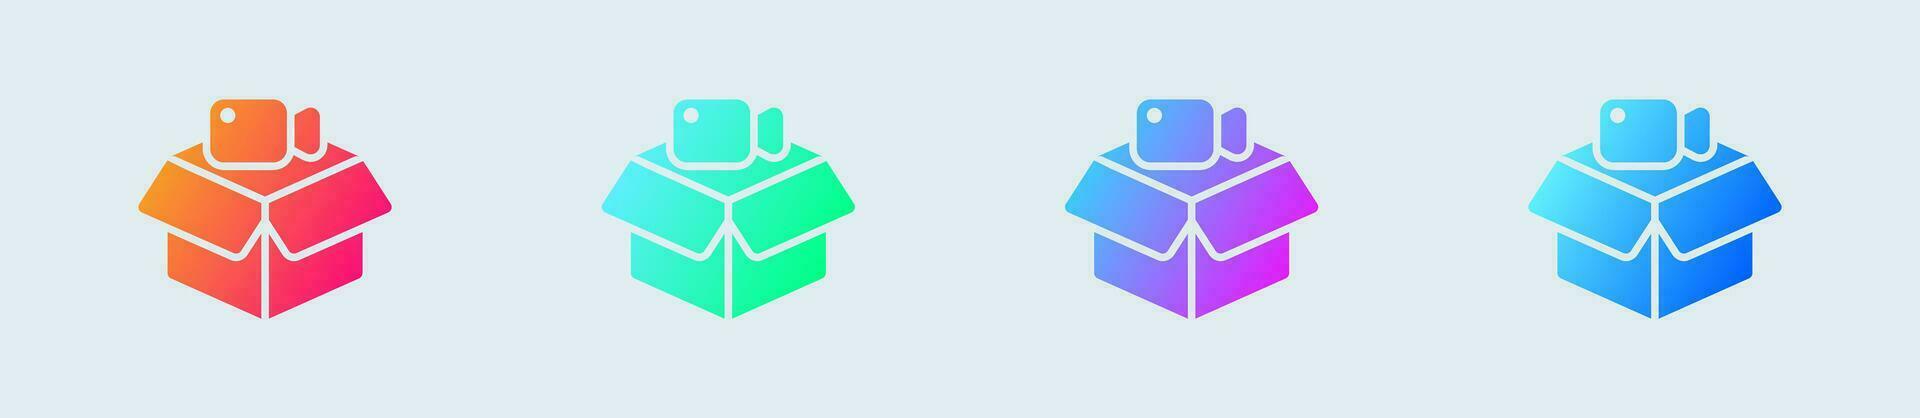 Unboxing video solid icon in gradient colors. Review signs vector illustration.